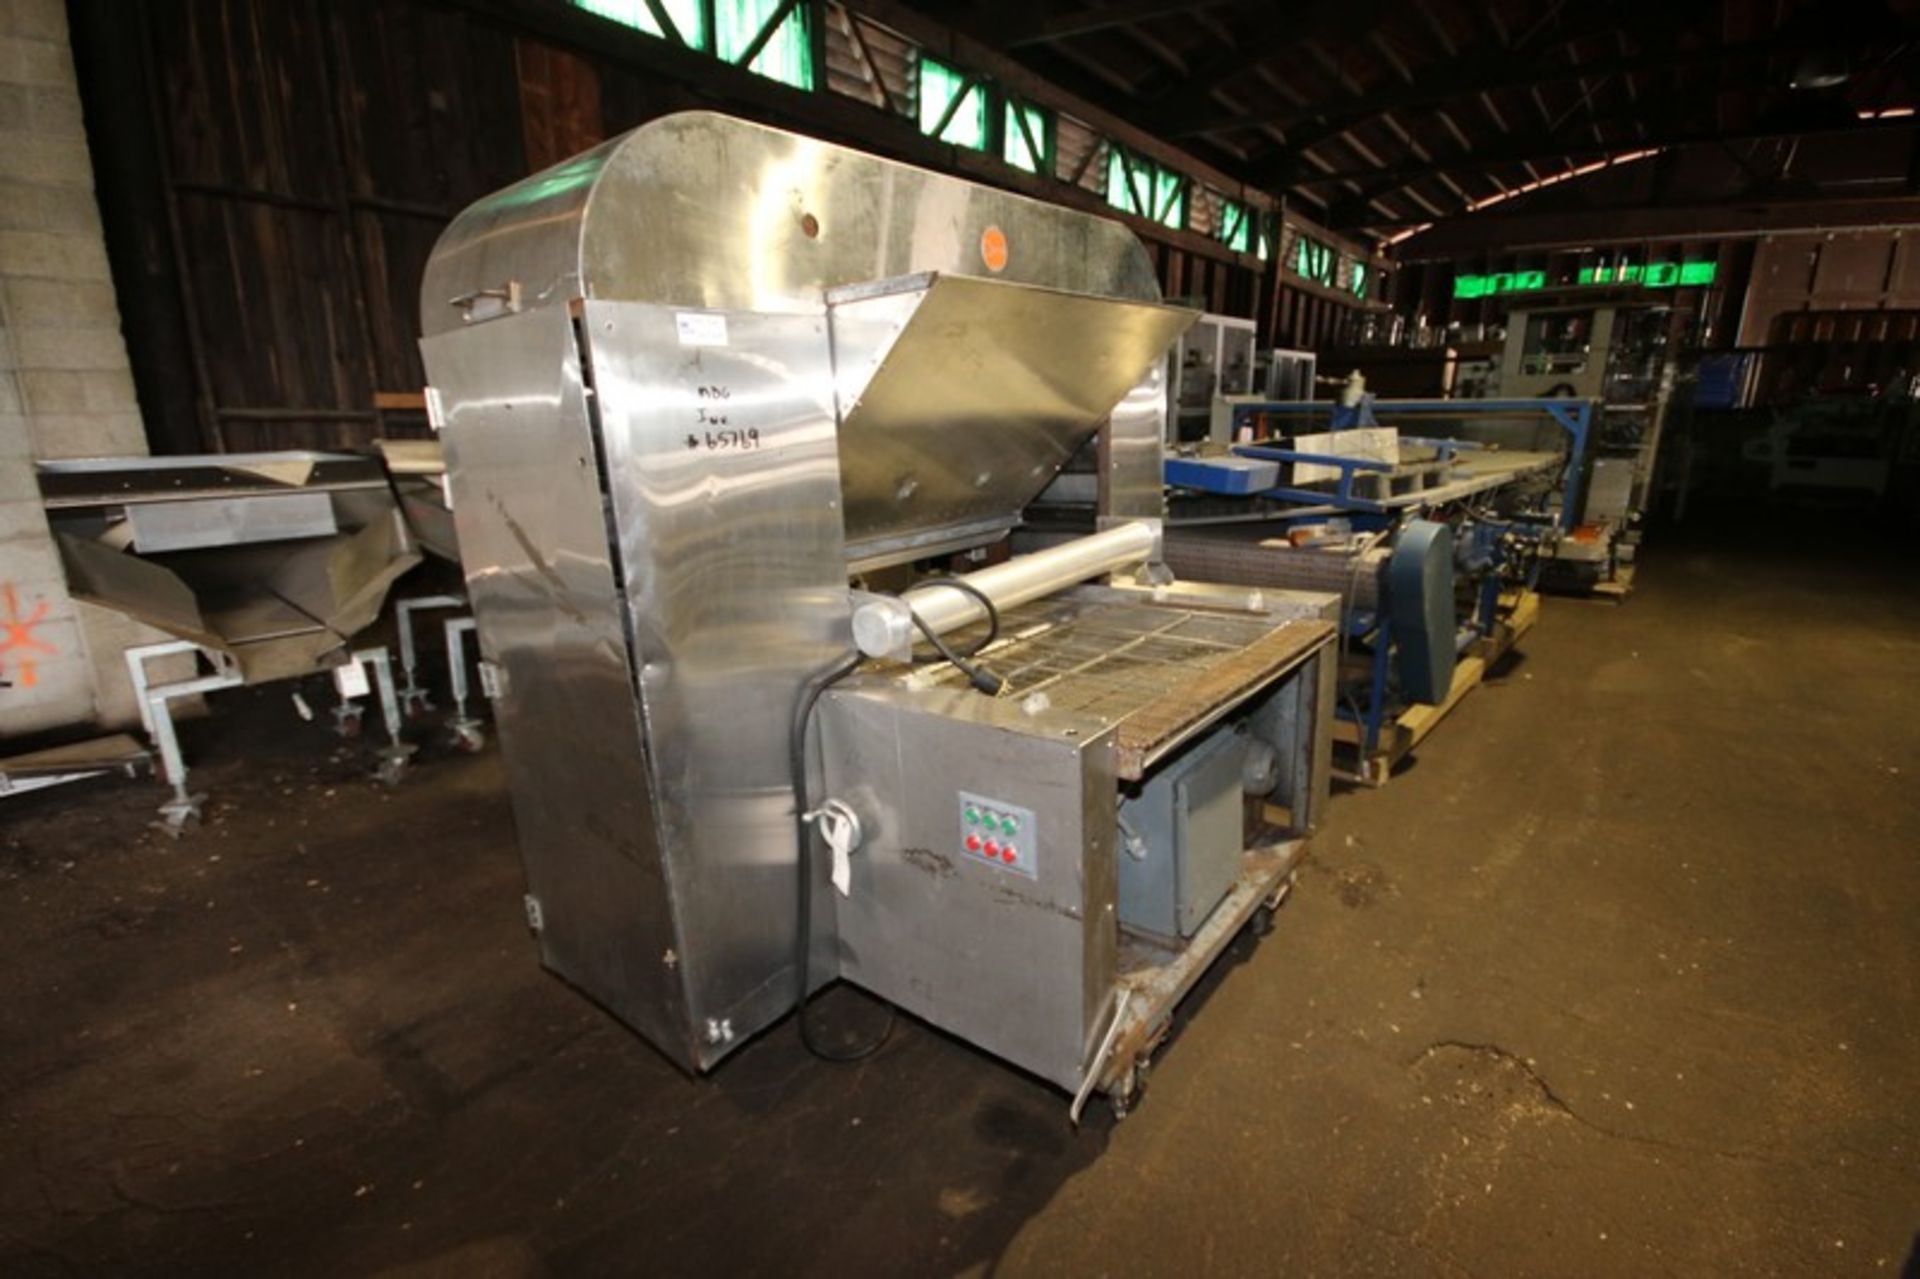 Oates S/S Depositor with 42" W Belt (INV#65769)(Located at the MDG Auction Showroom in Pittsburgh, - Image 7 of 7